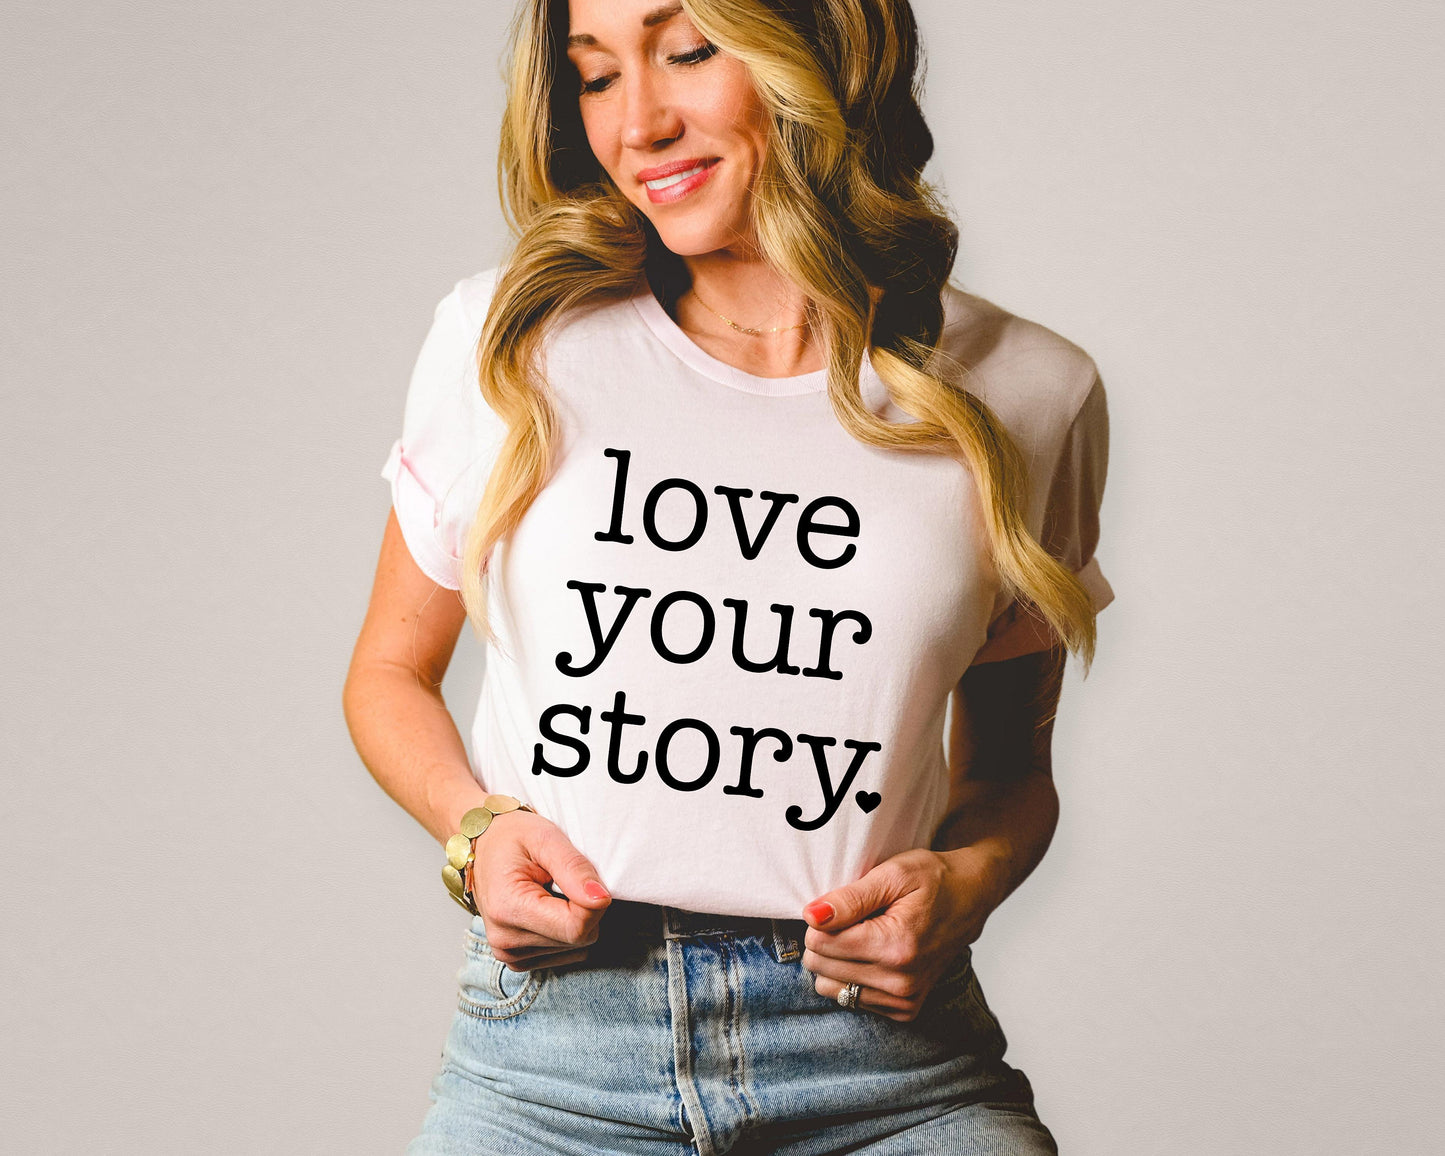 Love Your Story Princess Fairytale Ultra Soft Graphic Tee Unisex Soft Tee T-shirt for Women or Men